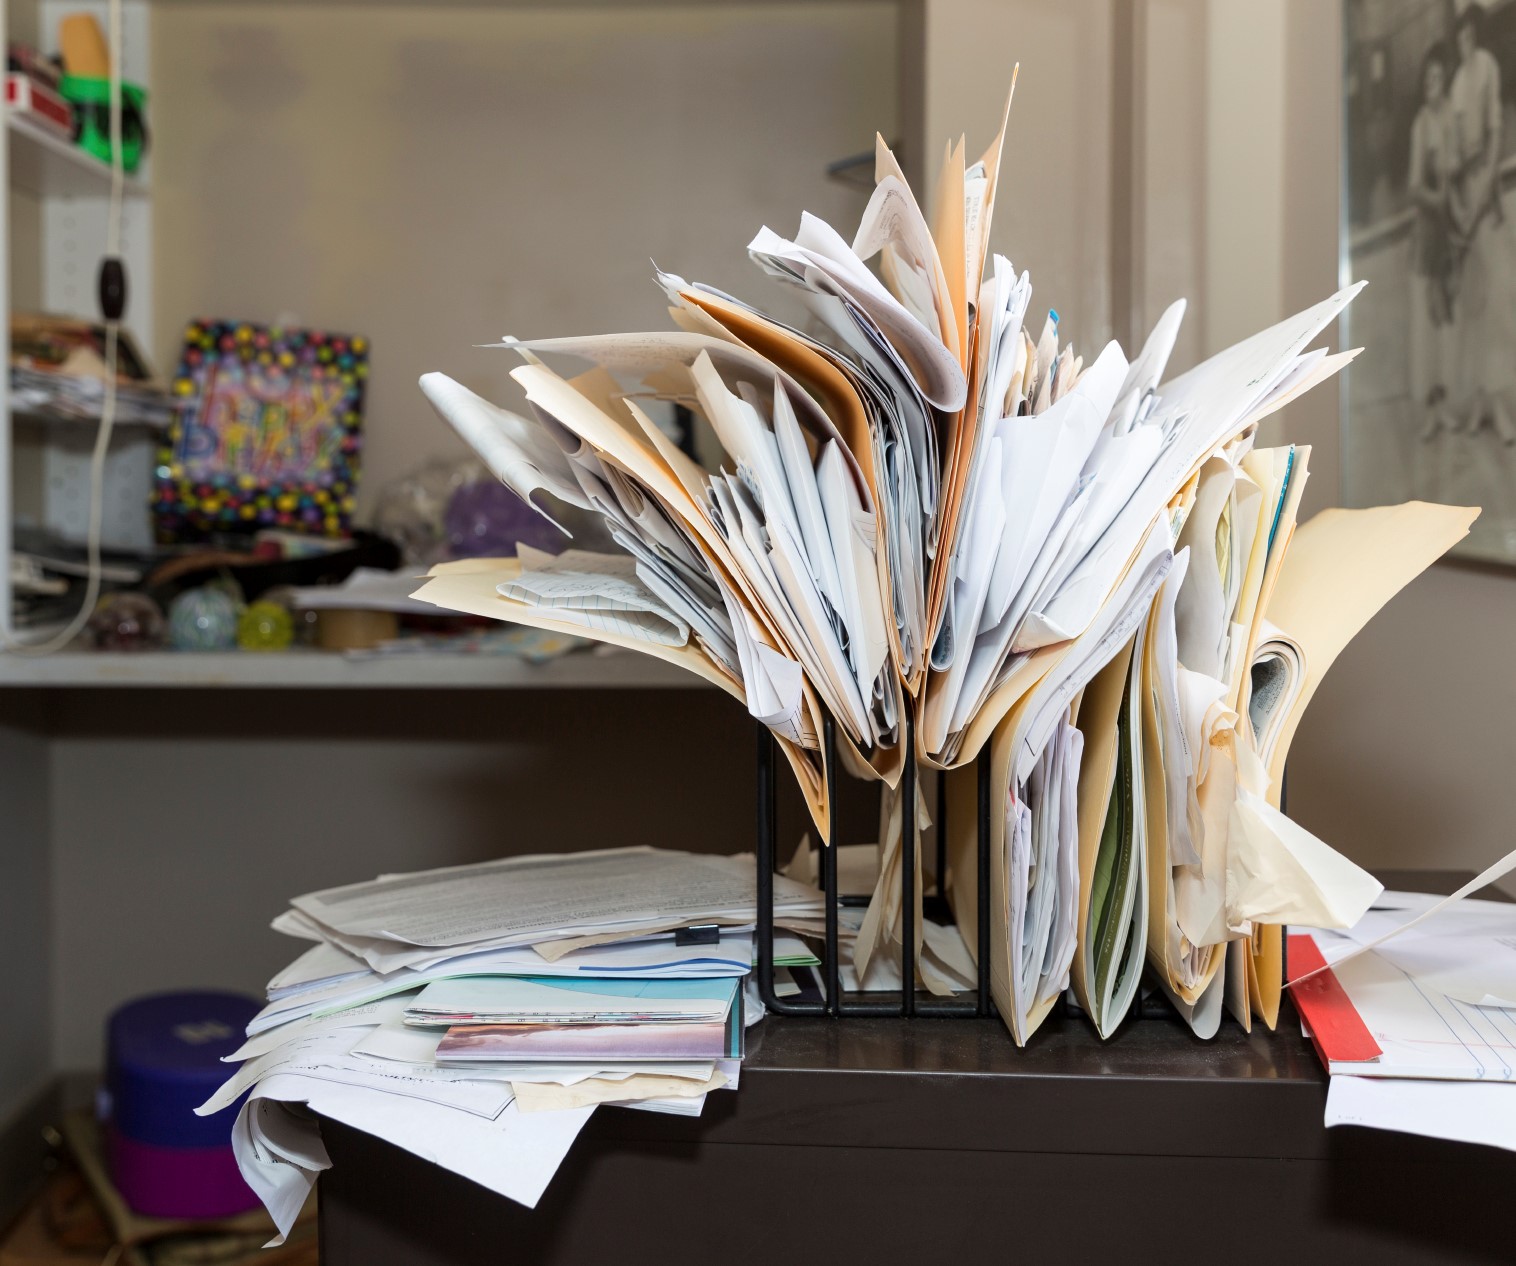 Use a Professional Organizer if You Have Too Much Paperwork